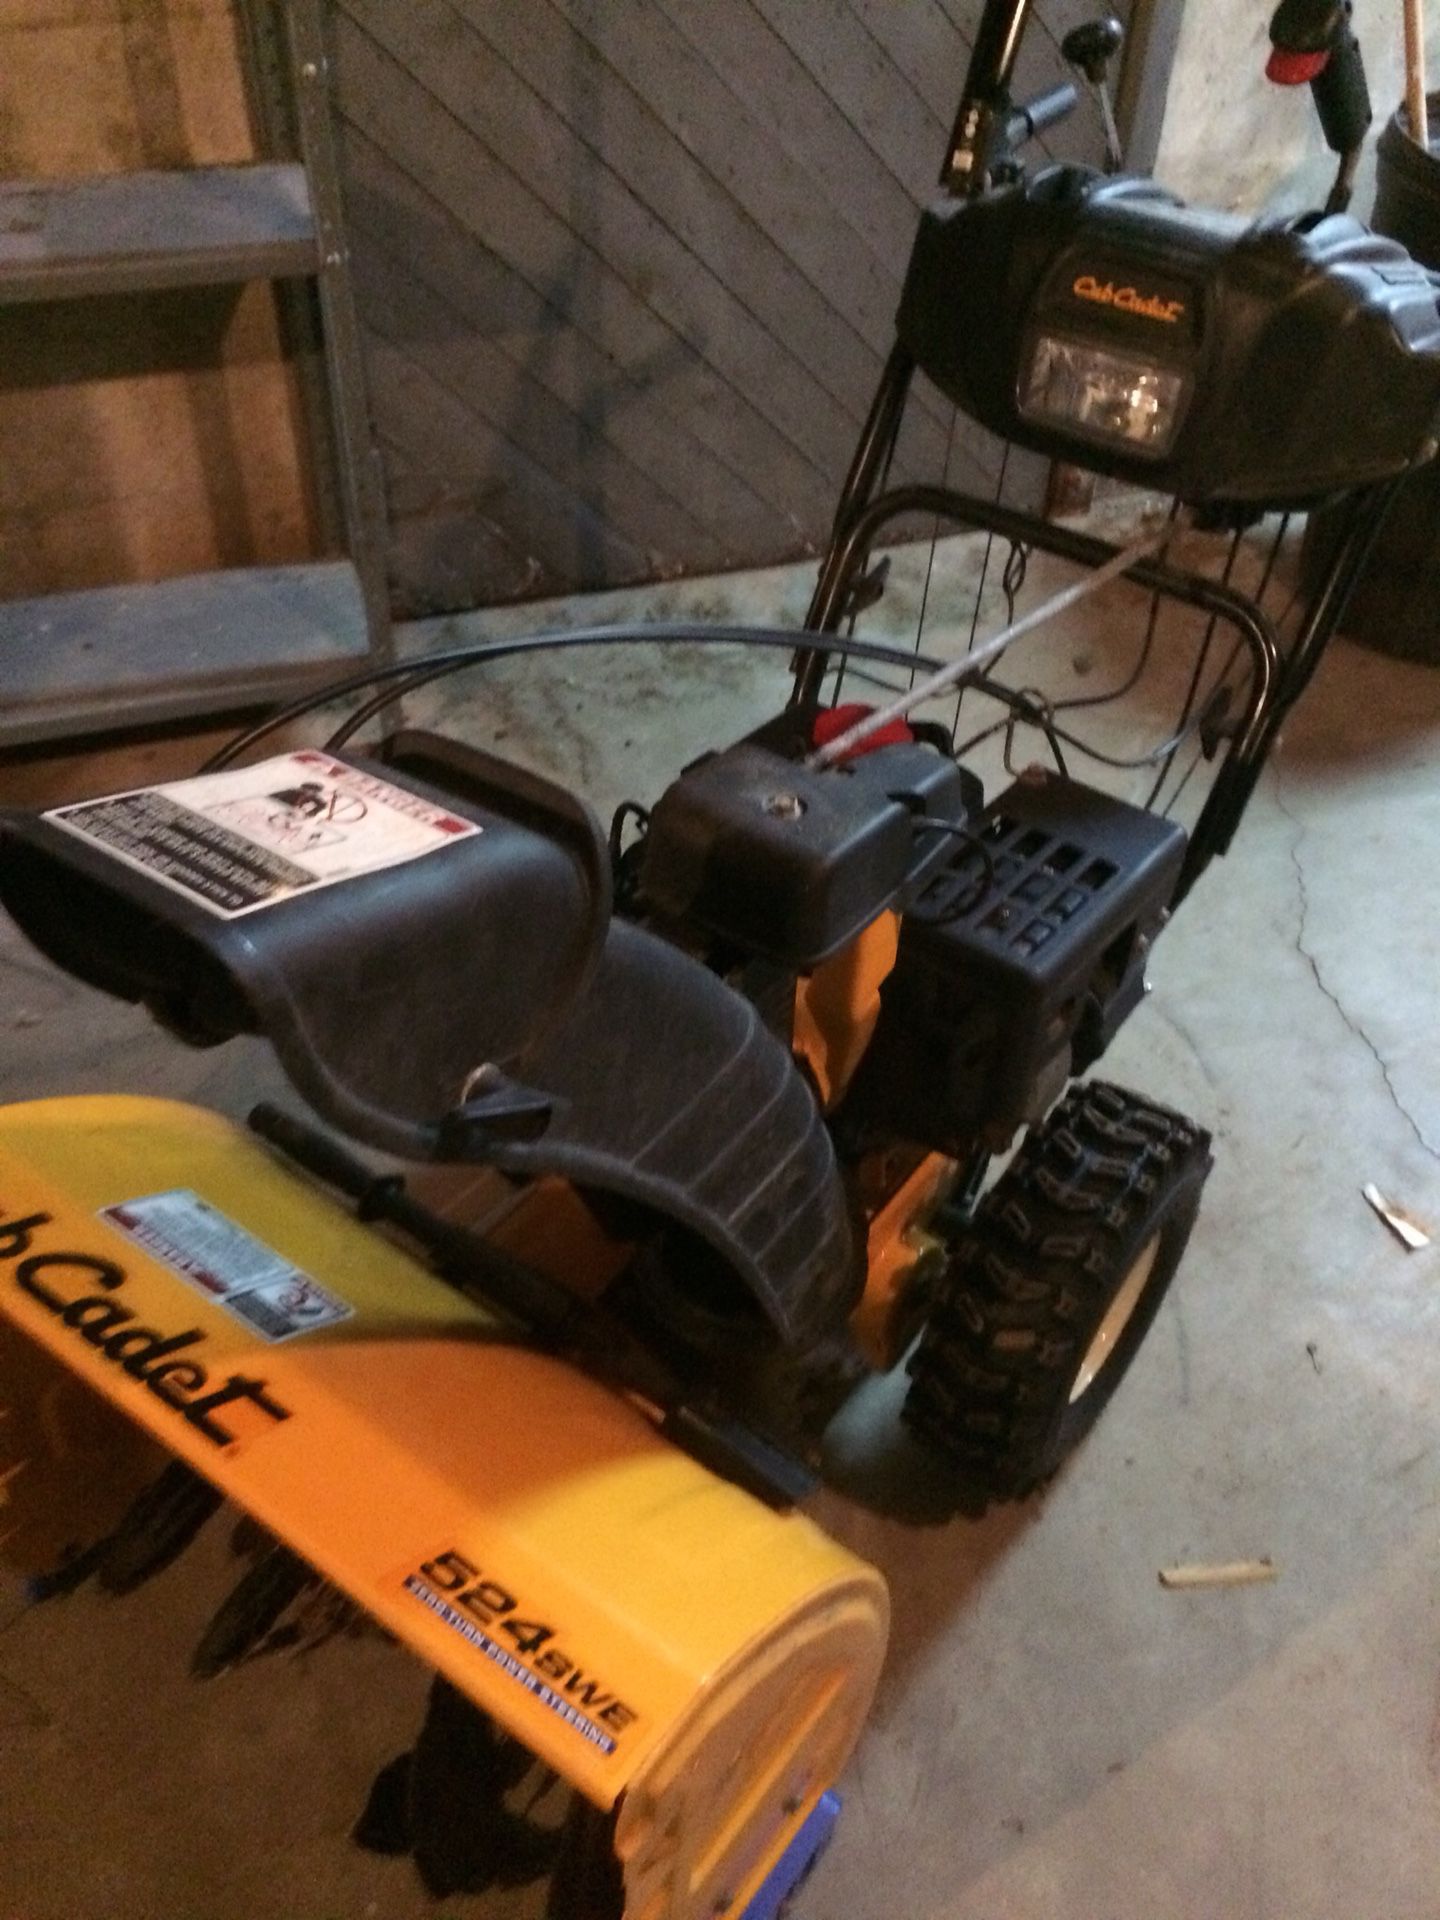 Cub Cadet snowblower with electric start